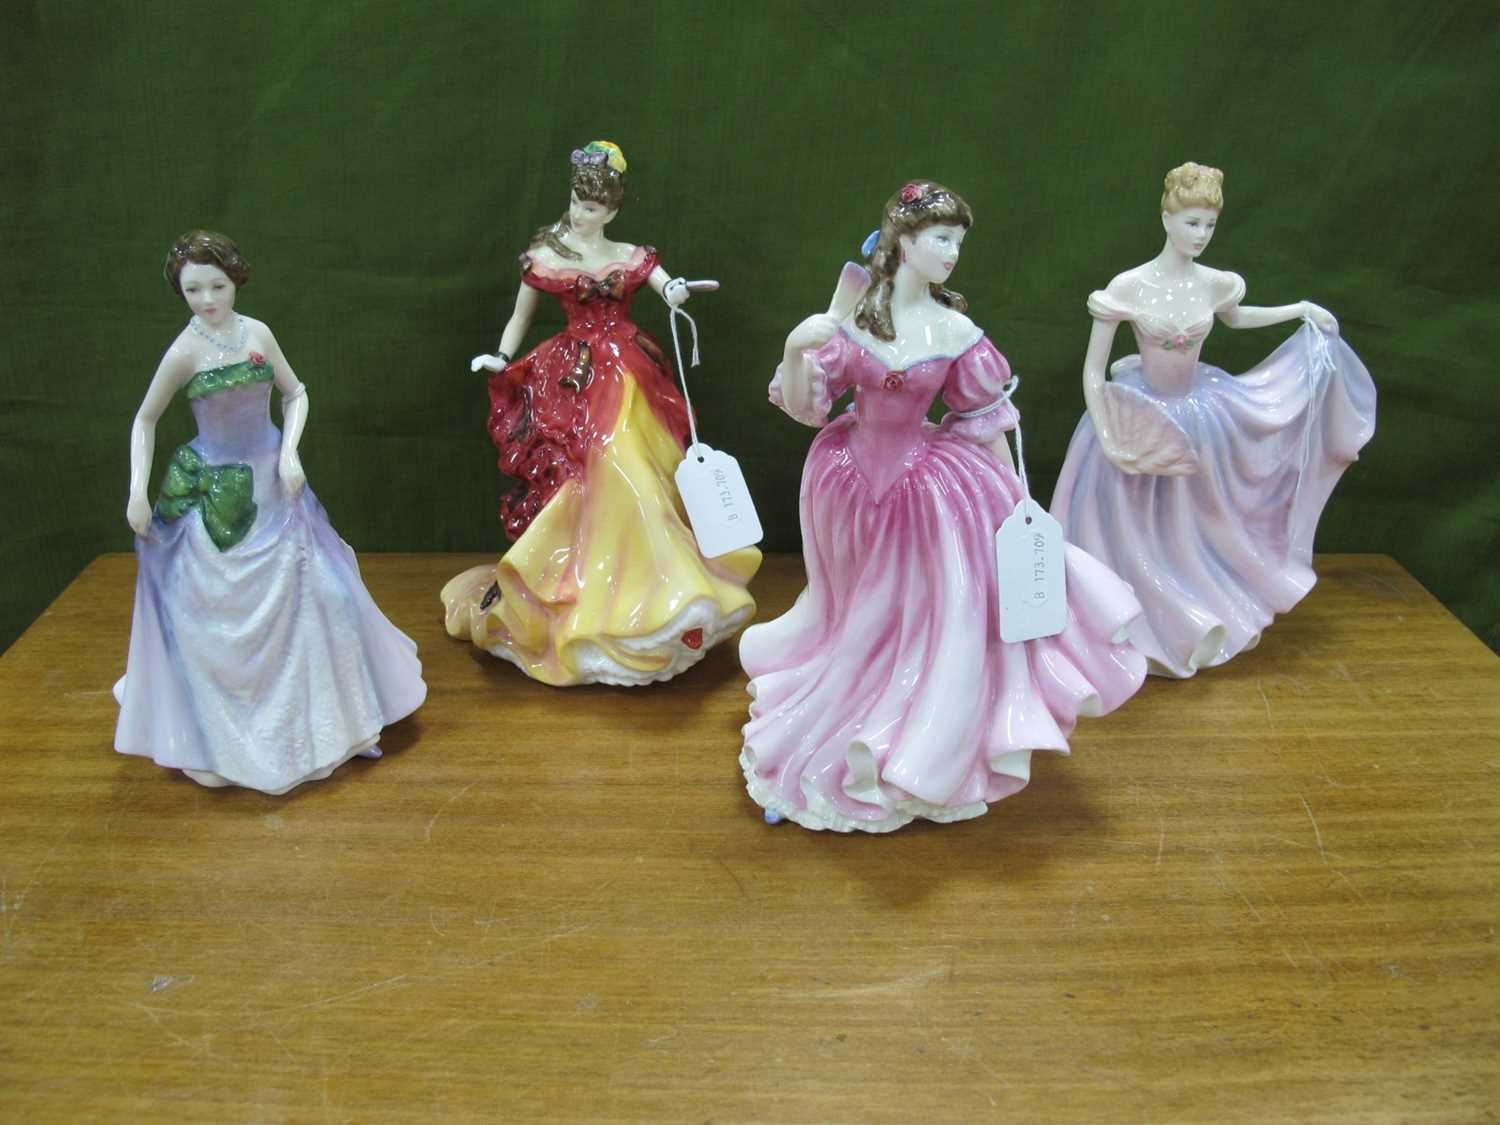 Royal Doulton Figure of The Year 'Belle', 21.5cm high, 'Lauren', 'Rachel', and 'Jessica', each